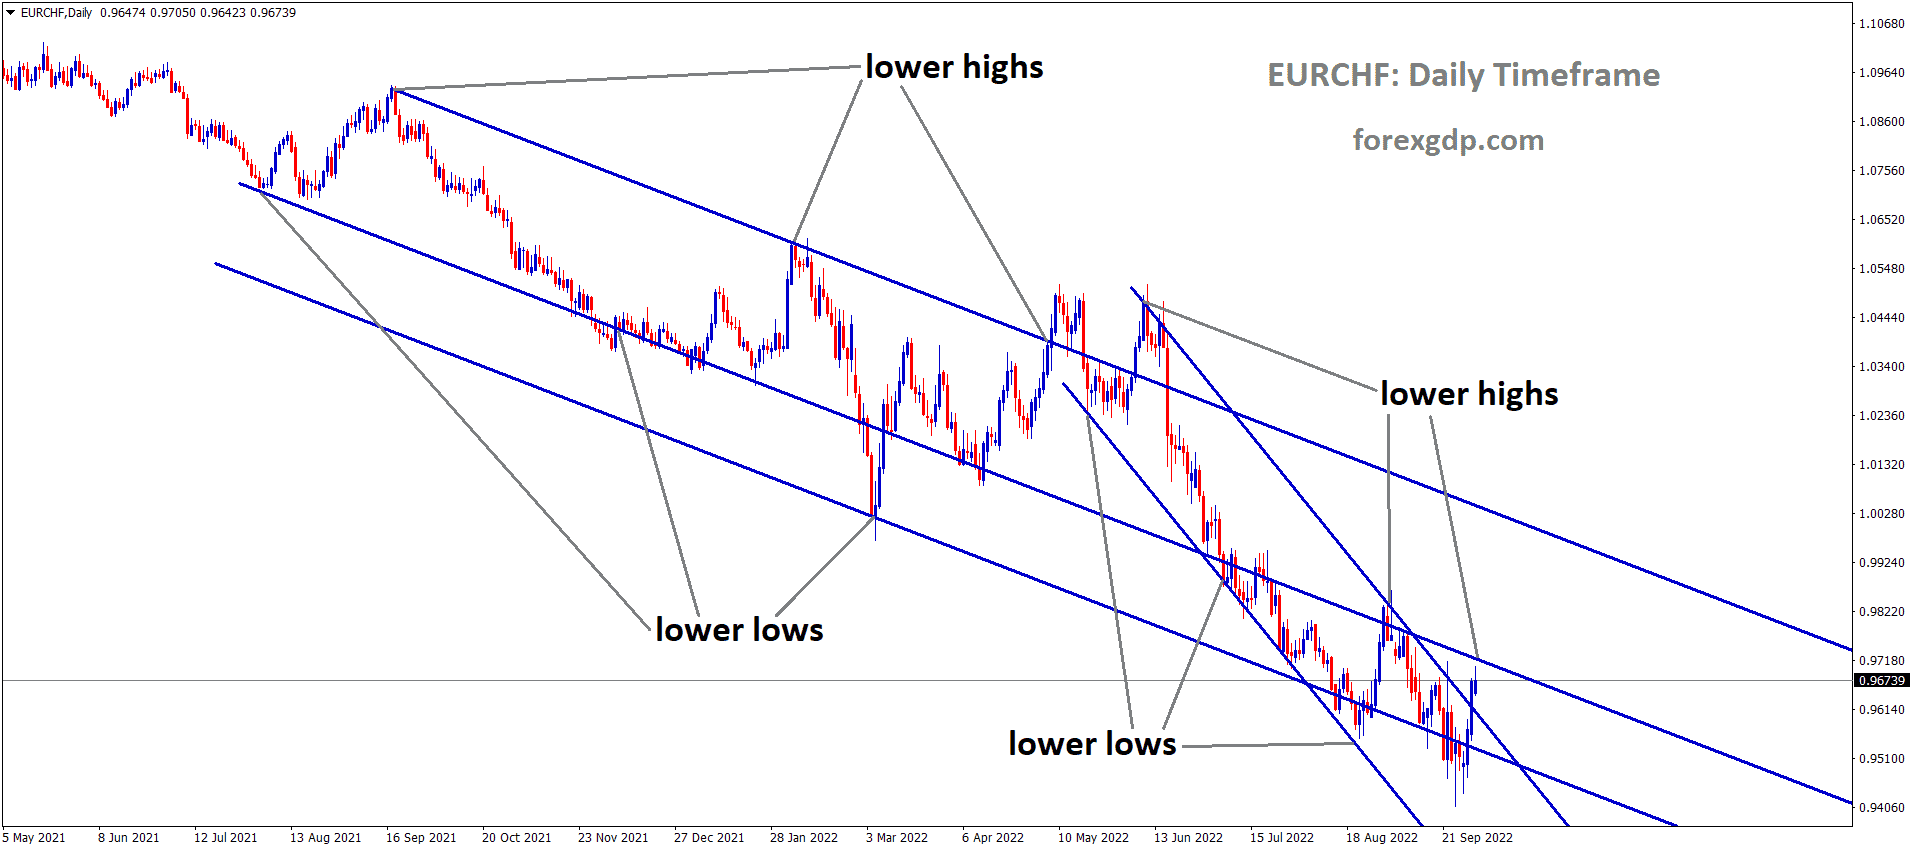 EURCHF is moving in the Descending channel and the market has reached the lower high area of the minor Descending channel under Major Descending channel.